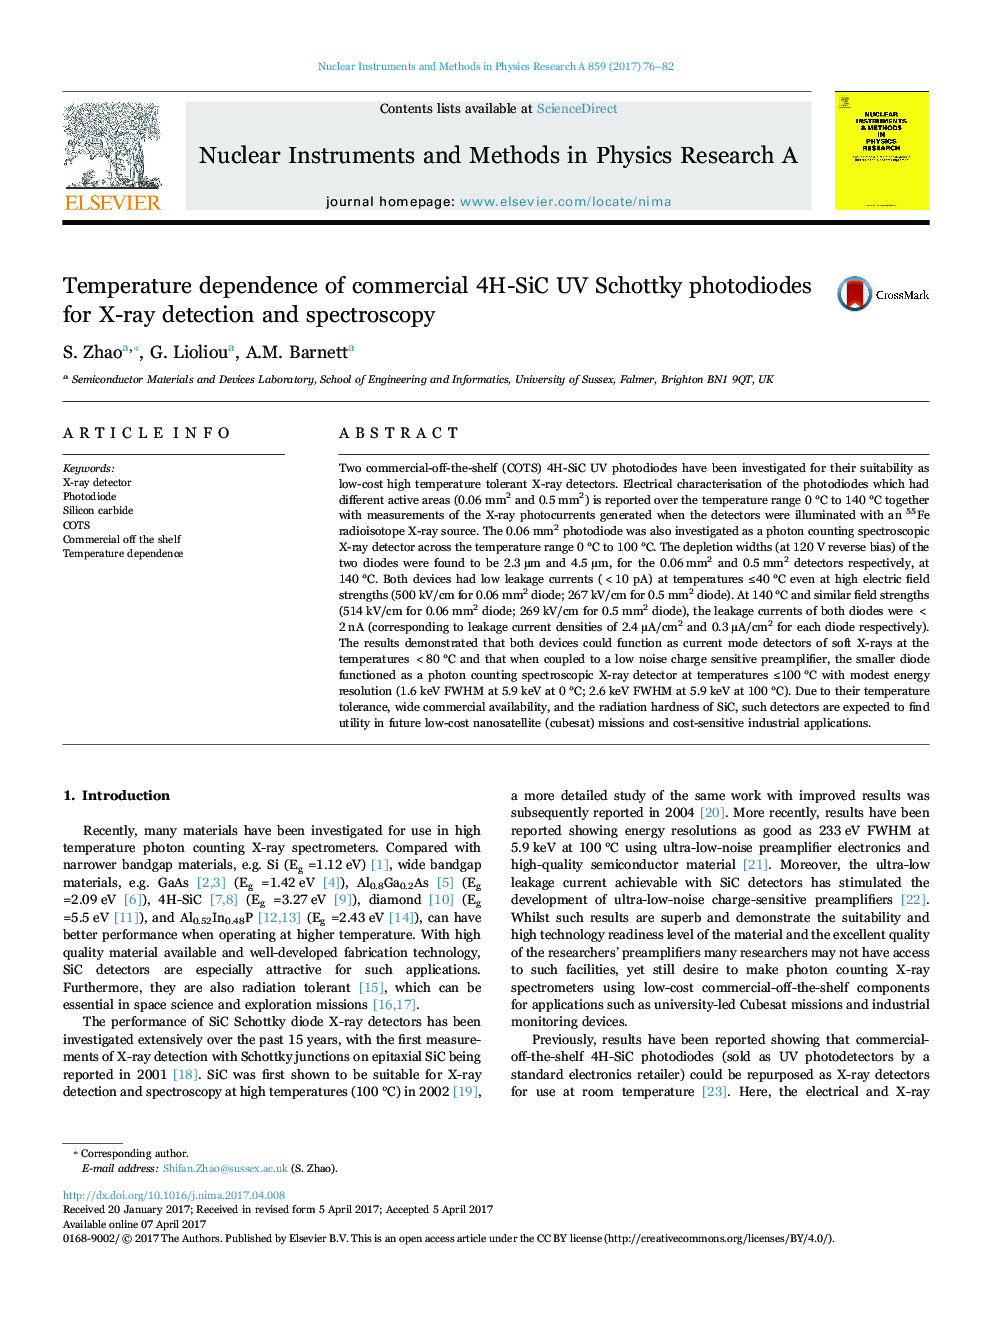 Temperature dependence of commercial 4H-SiC UV Schottky photodiodes for X-ray detection and spectroscopy